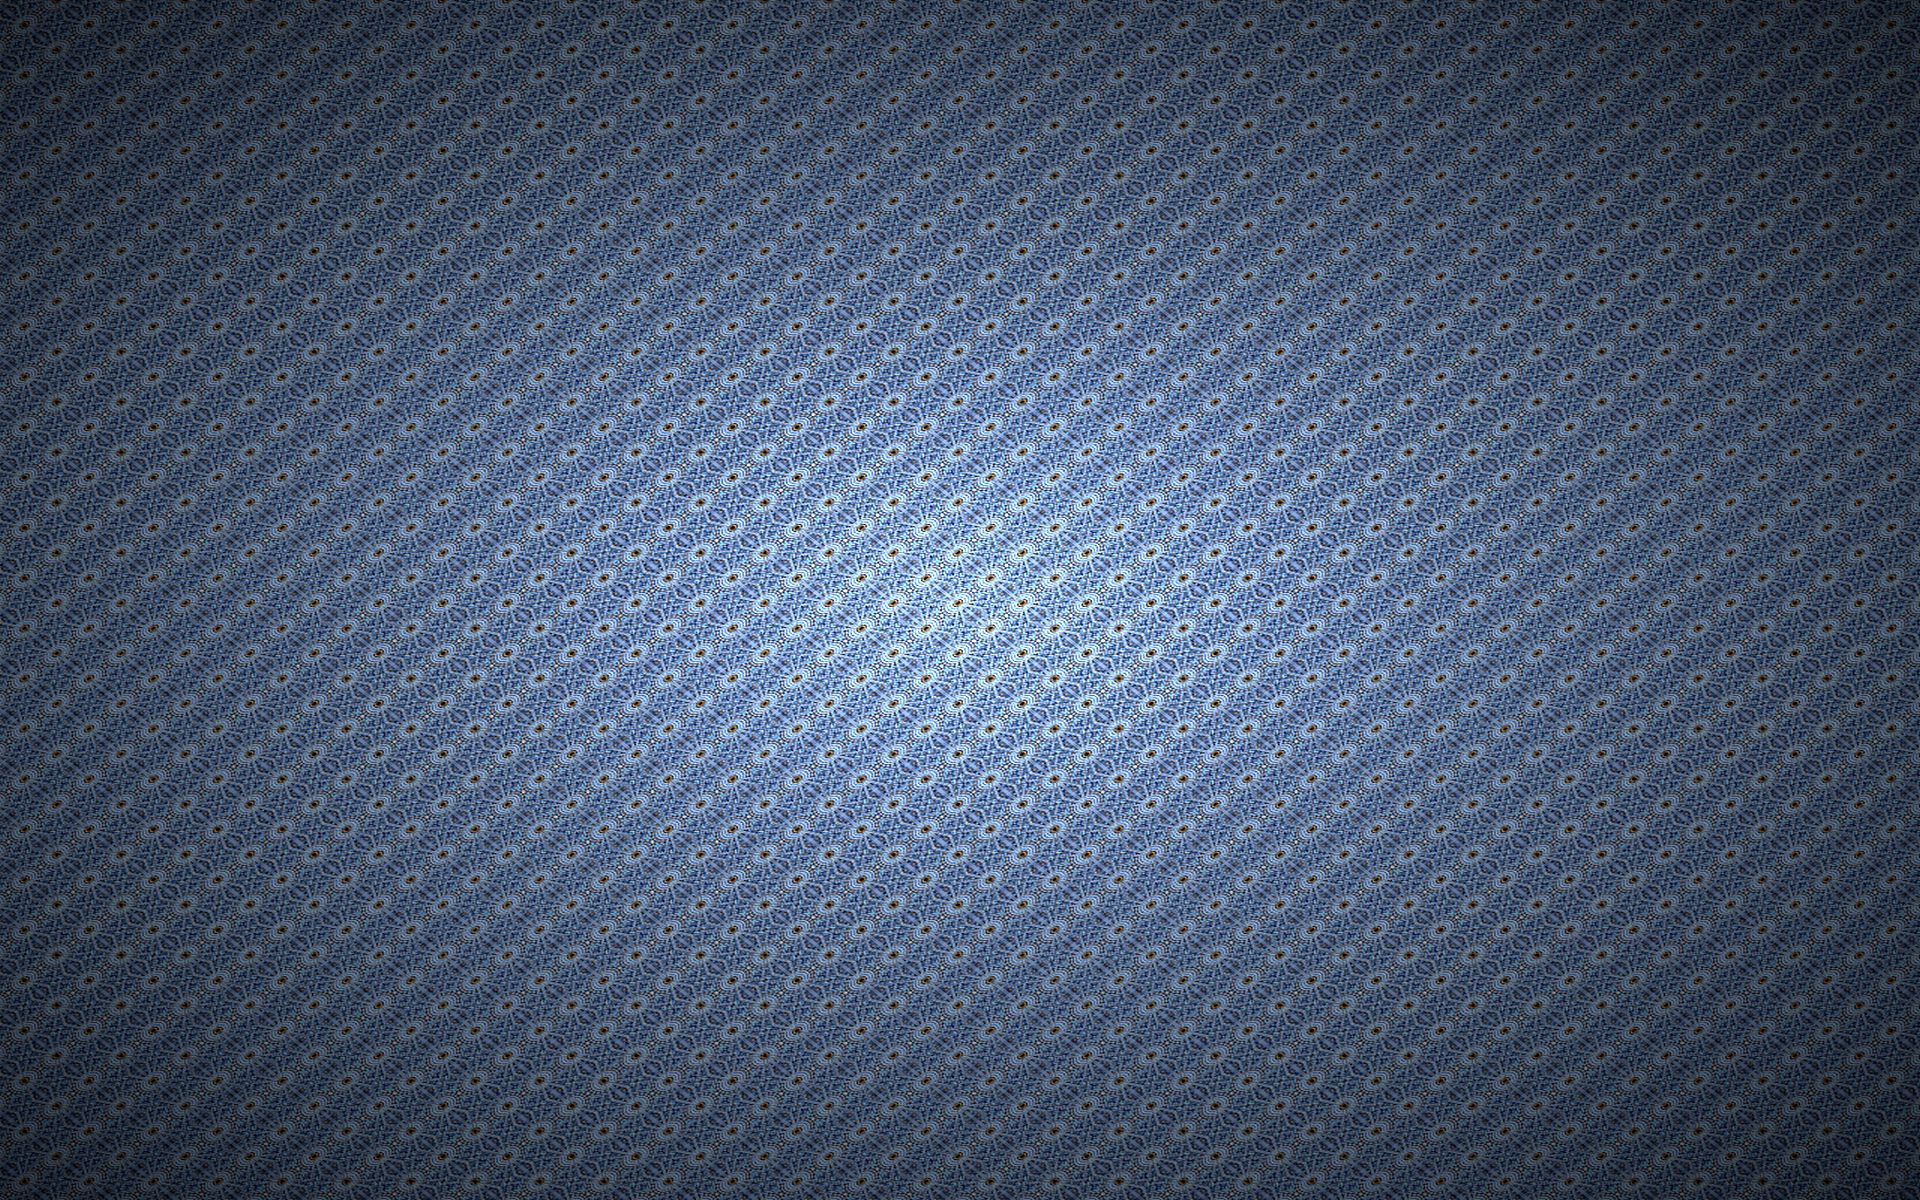 Wallpaper for mobile devices textures, texture, light, grey